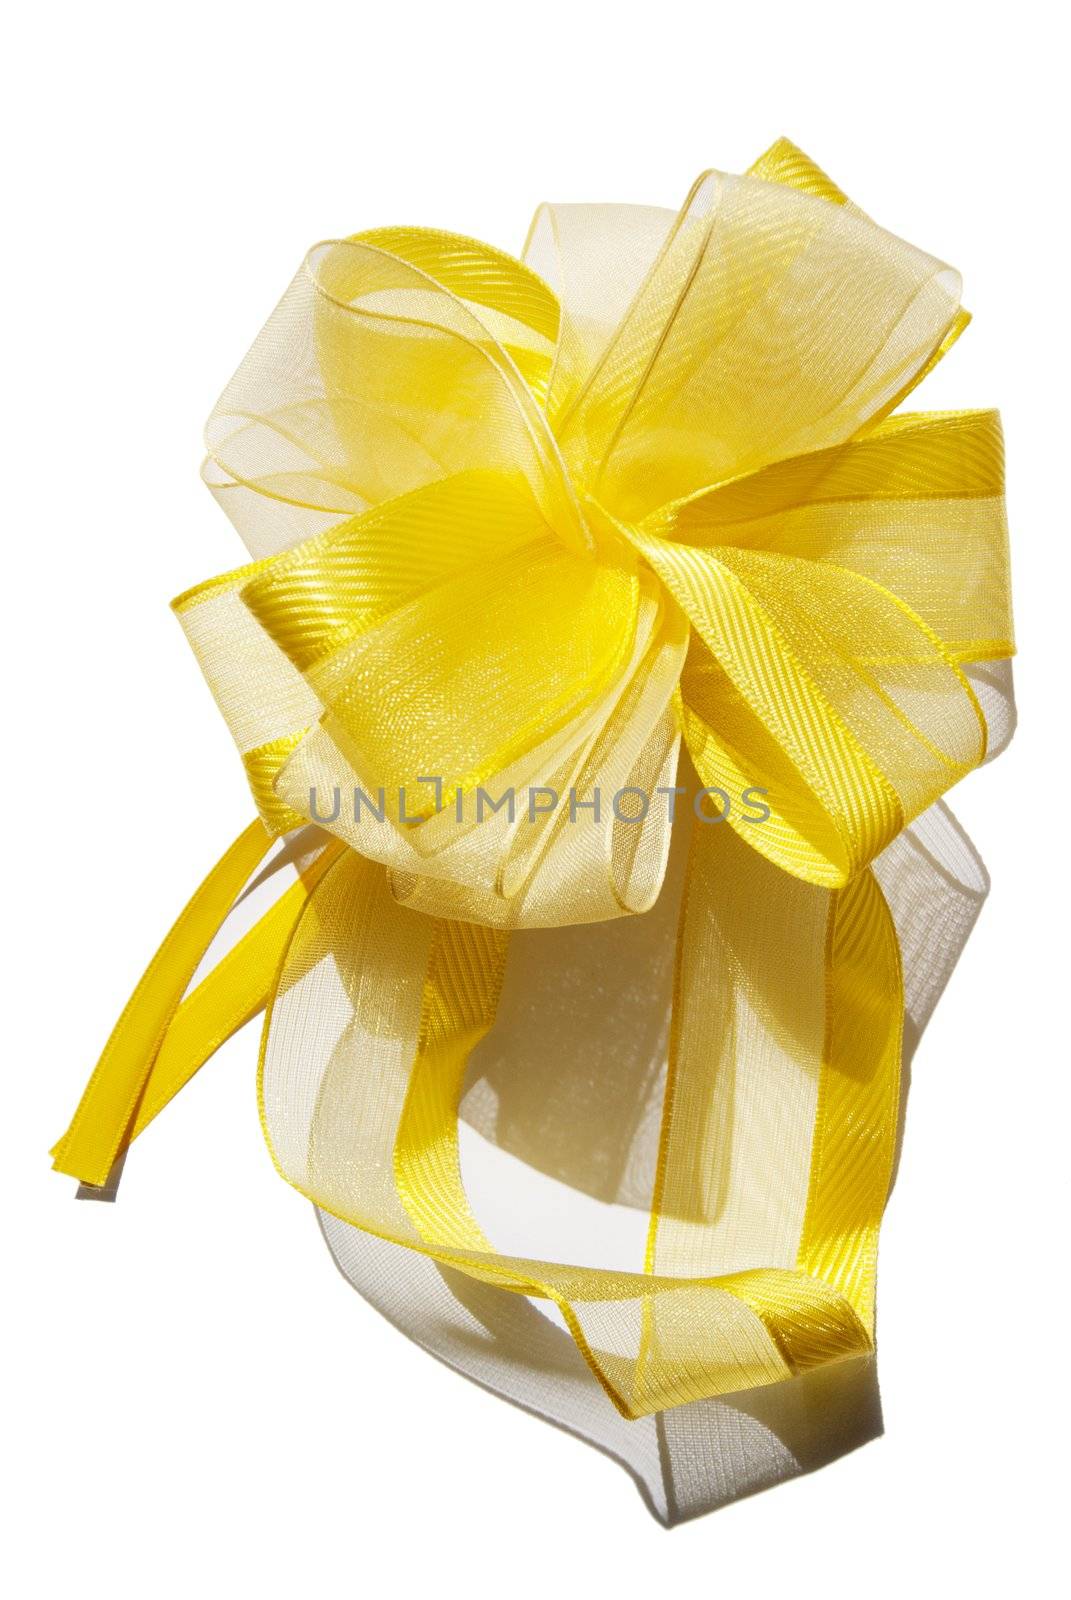 Gift  Bow Yellow With The Gold Ribbon by Larisa13